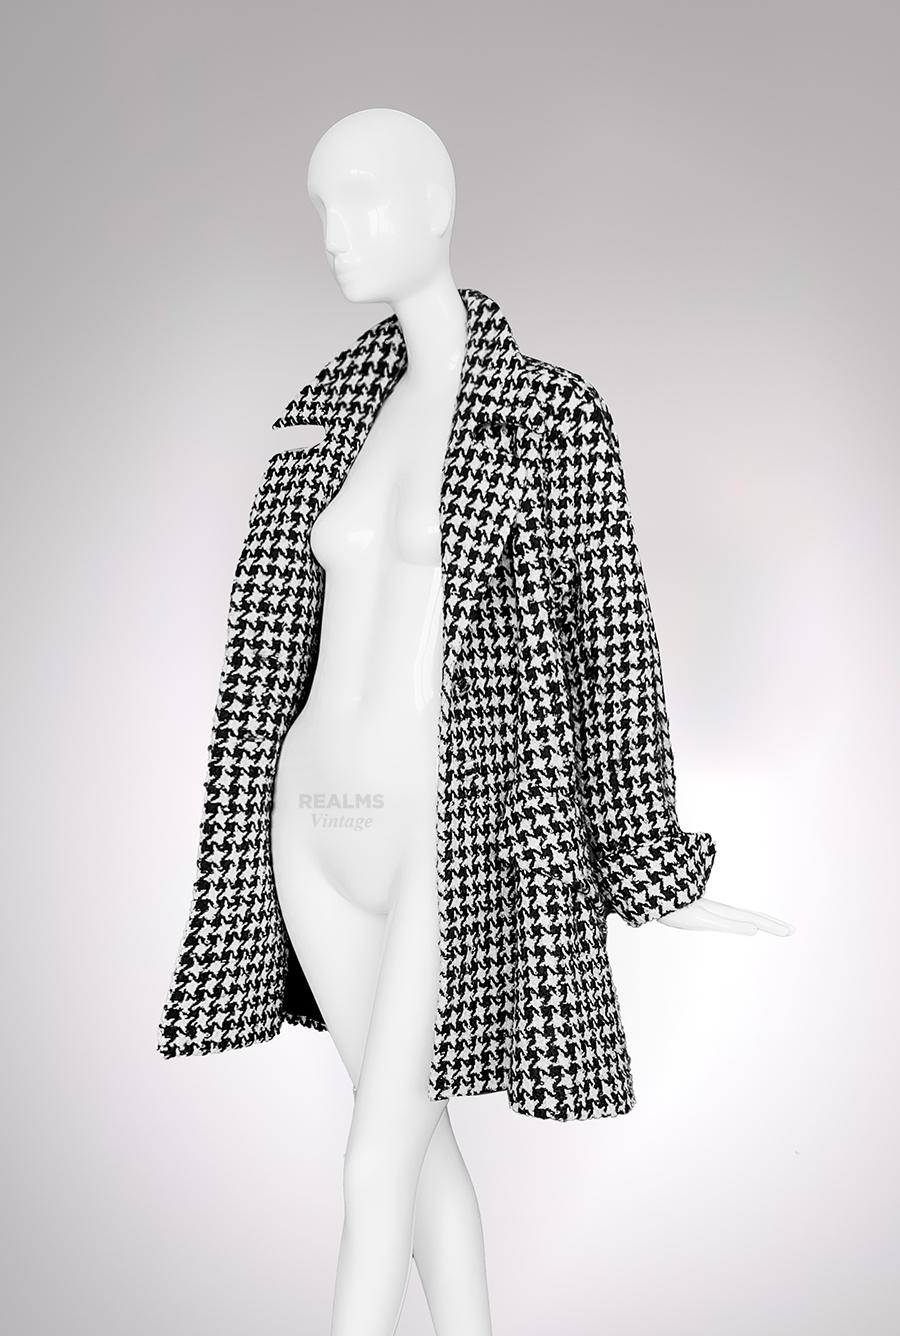 Archival Thierry Mugler Piece, FW1995 Collection.

Extremely rare Thierry Mugler Star-Houndstooth Coat.
Wearable Art. 
Legendary Thierry Mugler created his very own version of the classic houndstooth pattern by turning the iconic Mugler Star into a